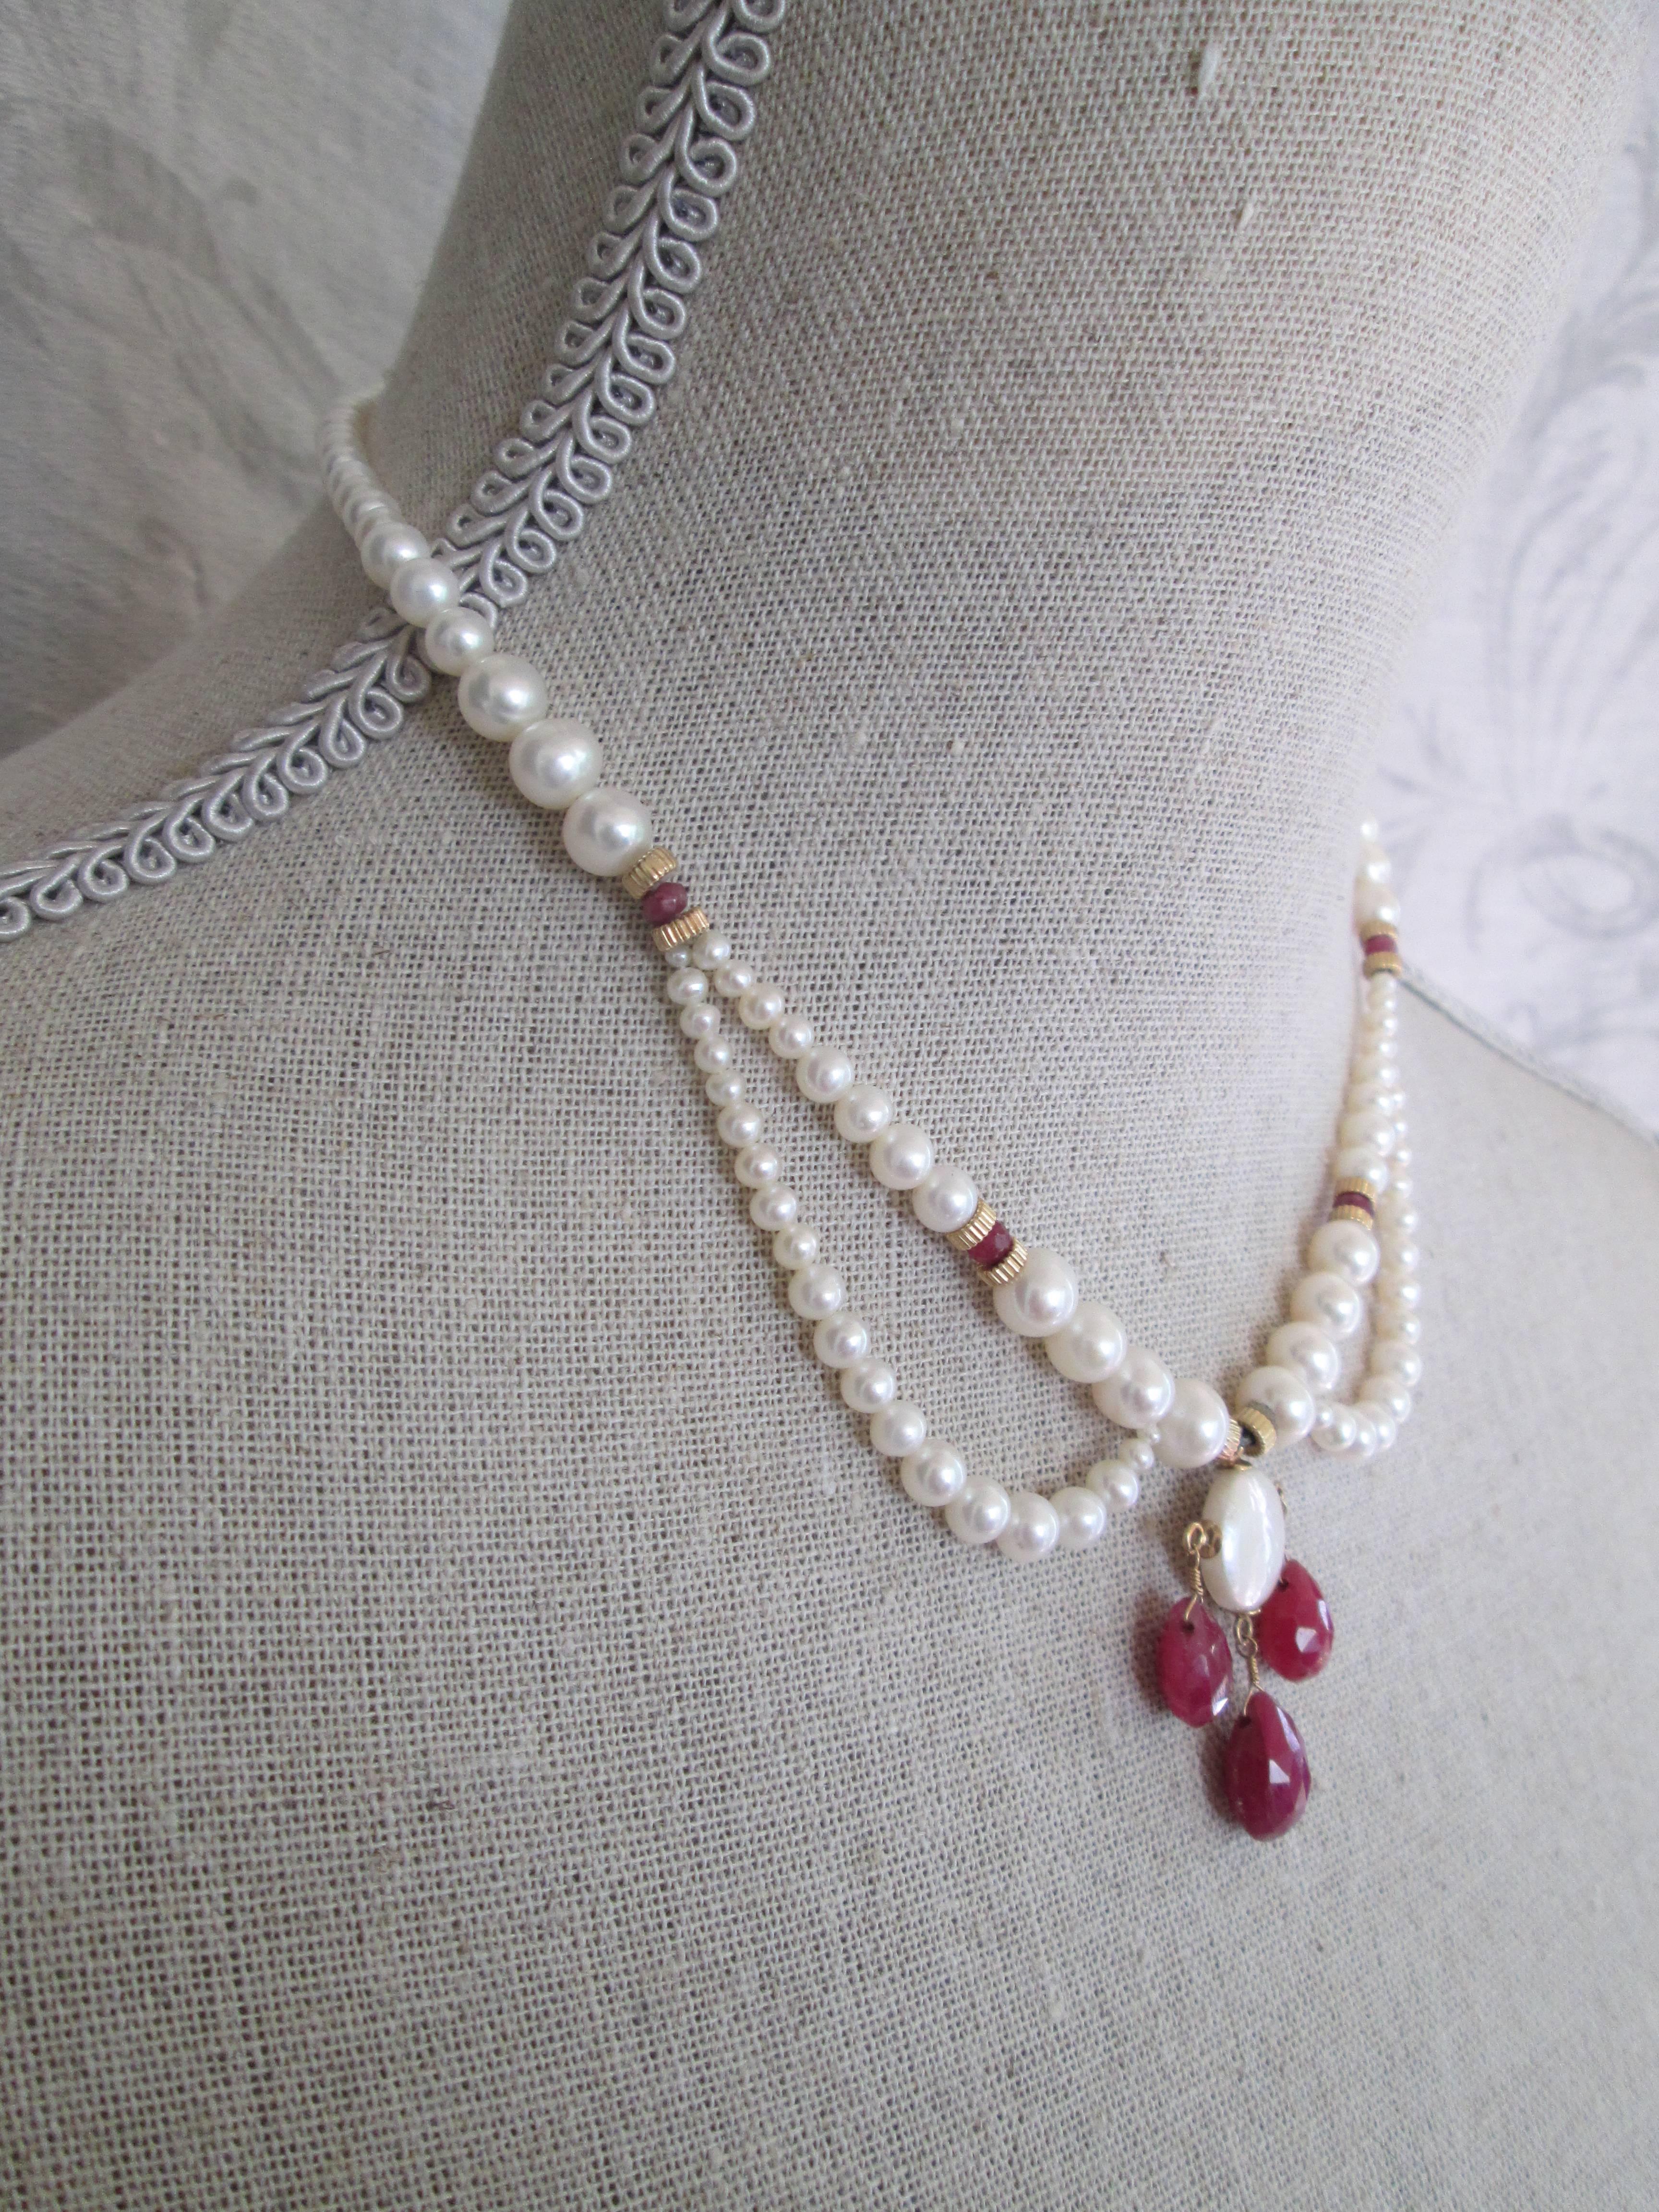 Late Victorian Graduated Pearl Draped Necklace with Ruby Briolettes , 14k gold clasp and beads